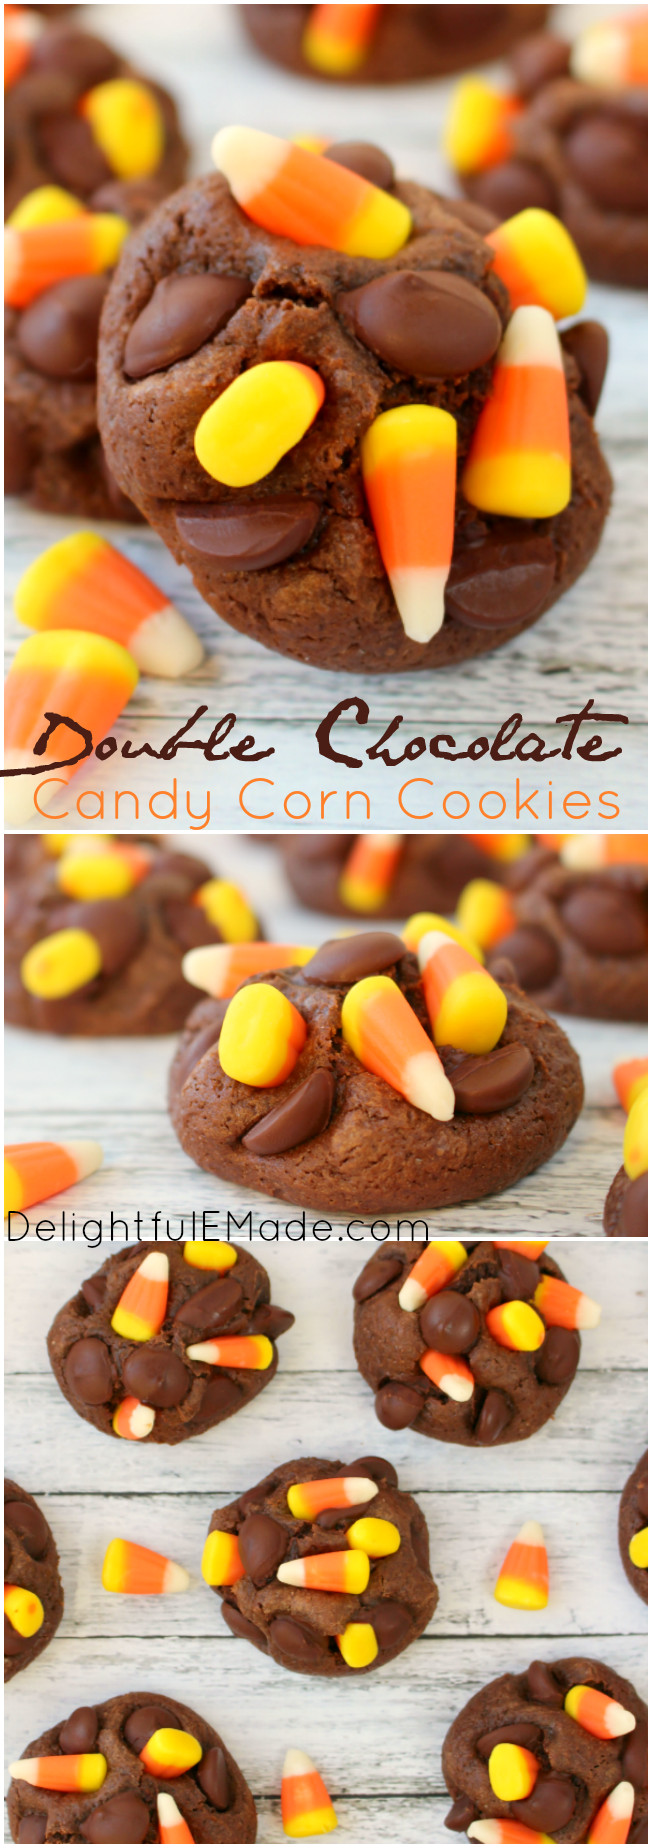 Chocolate Candy Corn
 Double Chocolate Candy Corn Cookies Delightful E Made